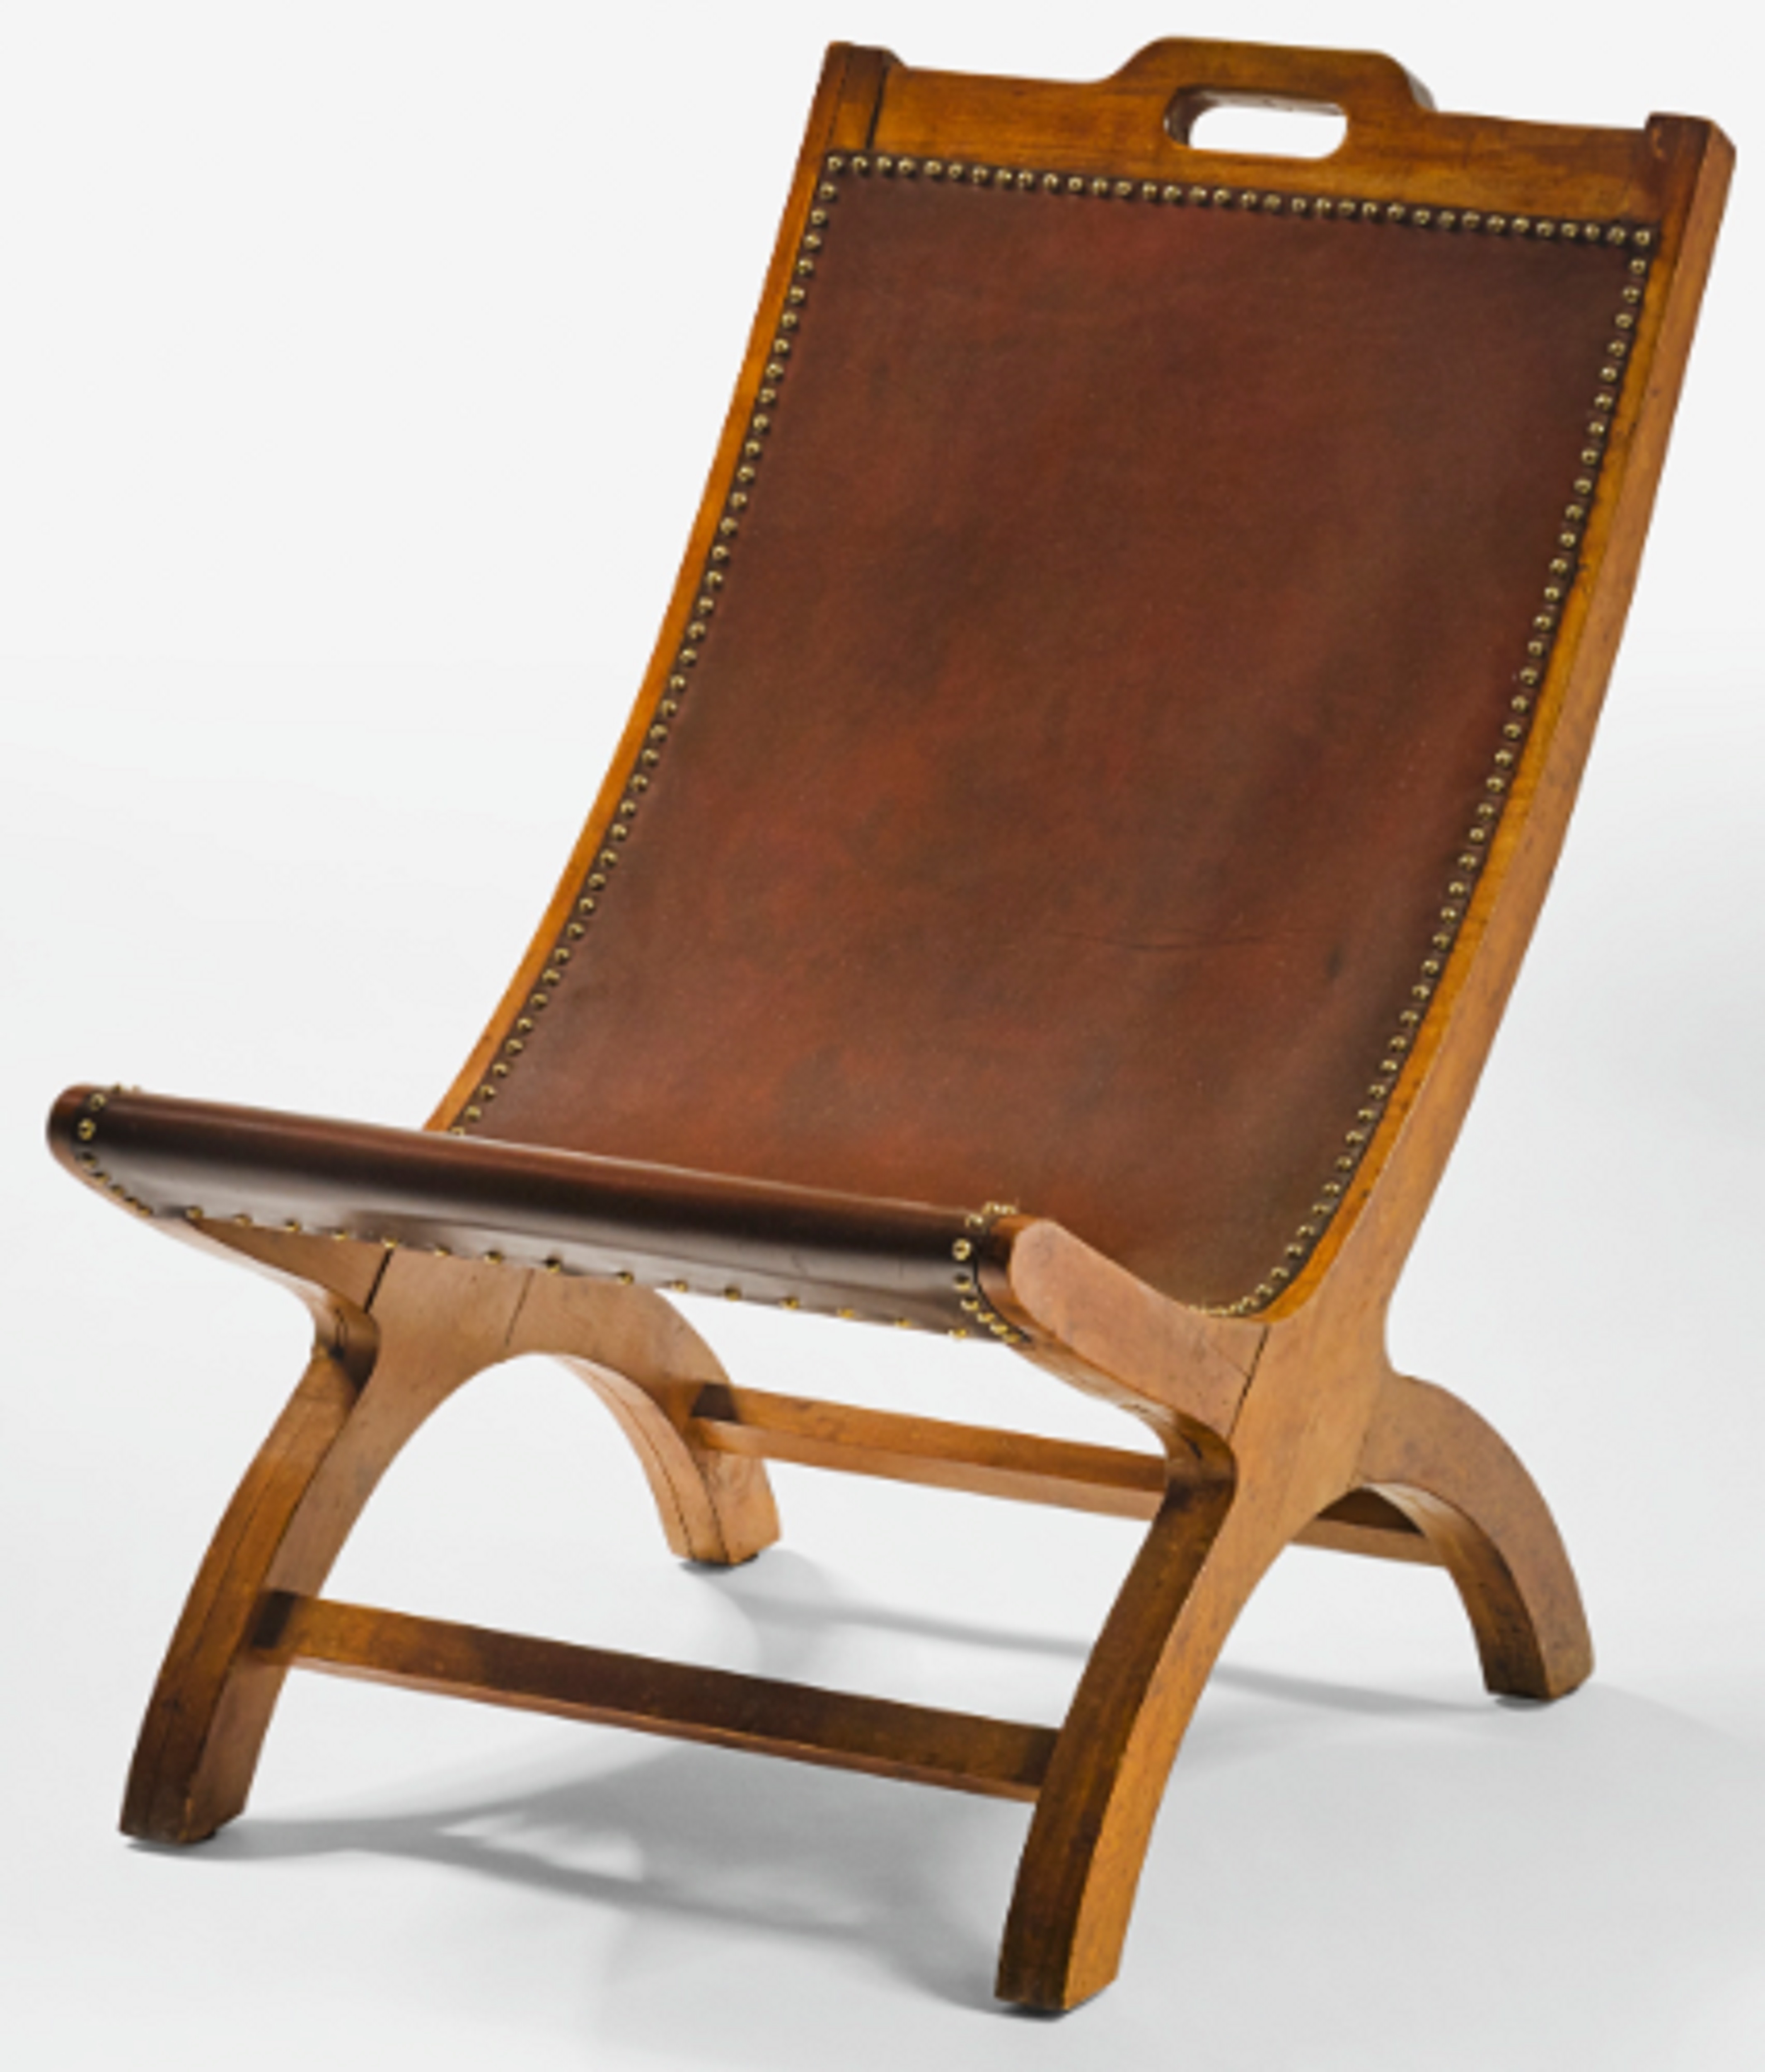 Josef Albers, designer; Mary “Molly” Gregory, maker; Mexican Chair A, c. 1940, ash, leather, brass, Los Angeles County Museum of Art, gift of the 2020 Decorative Arts and Design Acquisitions Committee (DA²) in memory of Peter Loughrey, with additional support from Alison and Geoffrey Edelstein, Suzanne Kayne, and Alice and Nahum Lainer, © The Josef and Anni Albers Foundation/Artists Rights Society (ARS), New York, courtesy The Josef and Anni Albers Foundation and David Zwirner